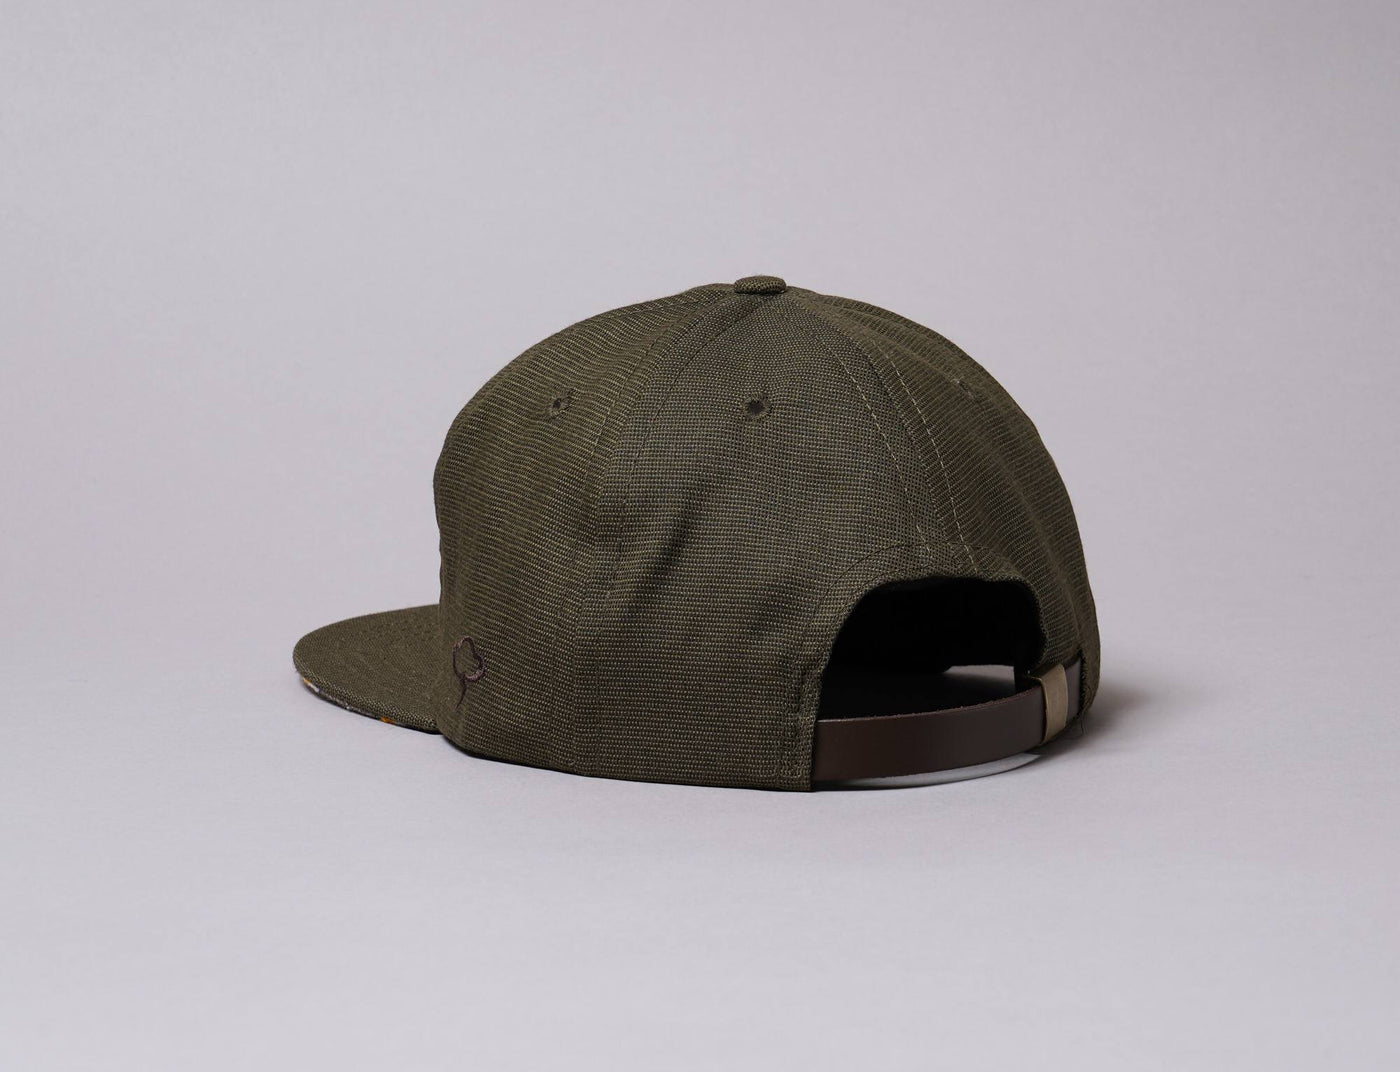 Cap Adjustable The Ampal Creative Nature Was Here Strapback Olive The Ampal Creative Adjustable Cap / Green / One Size